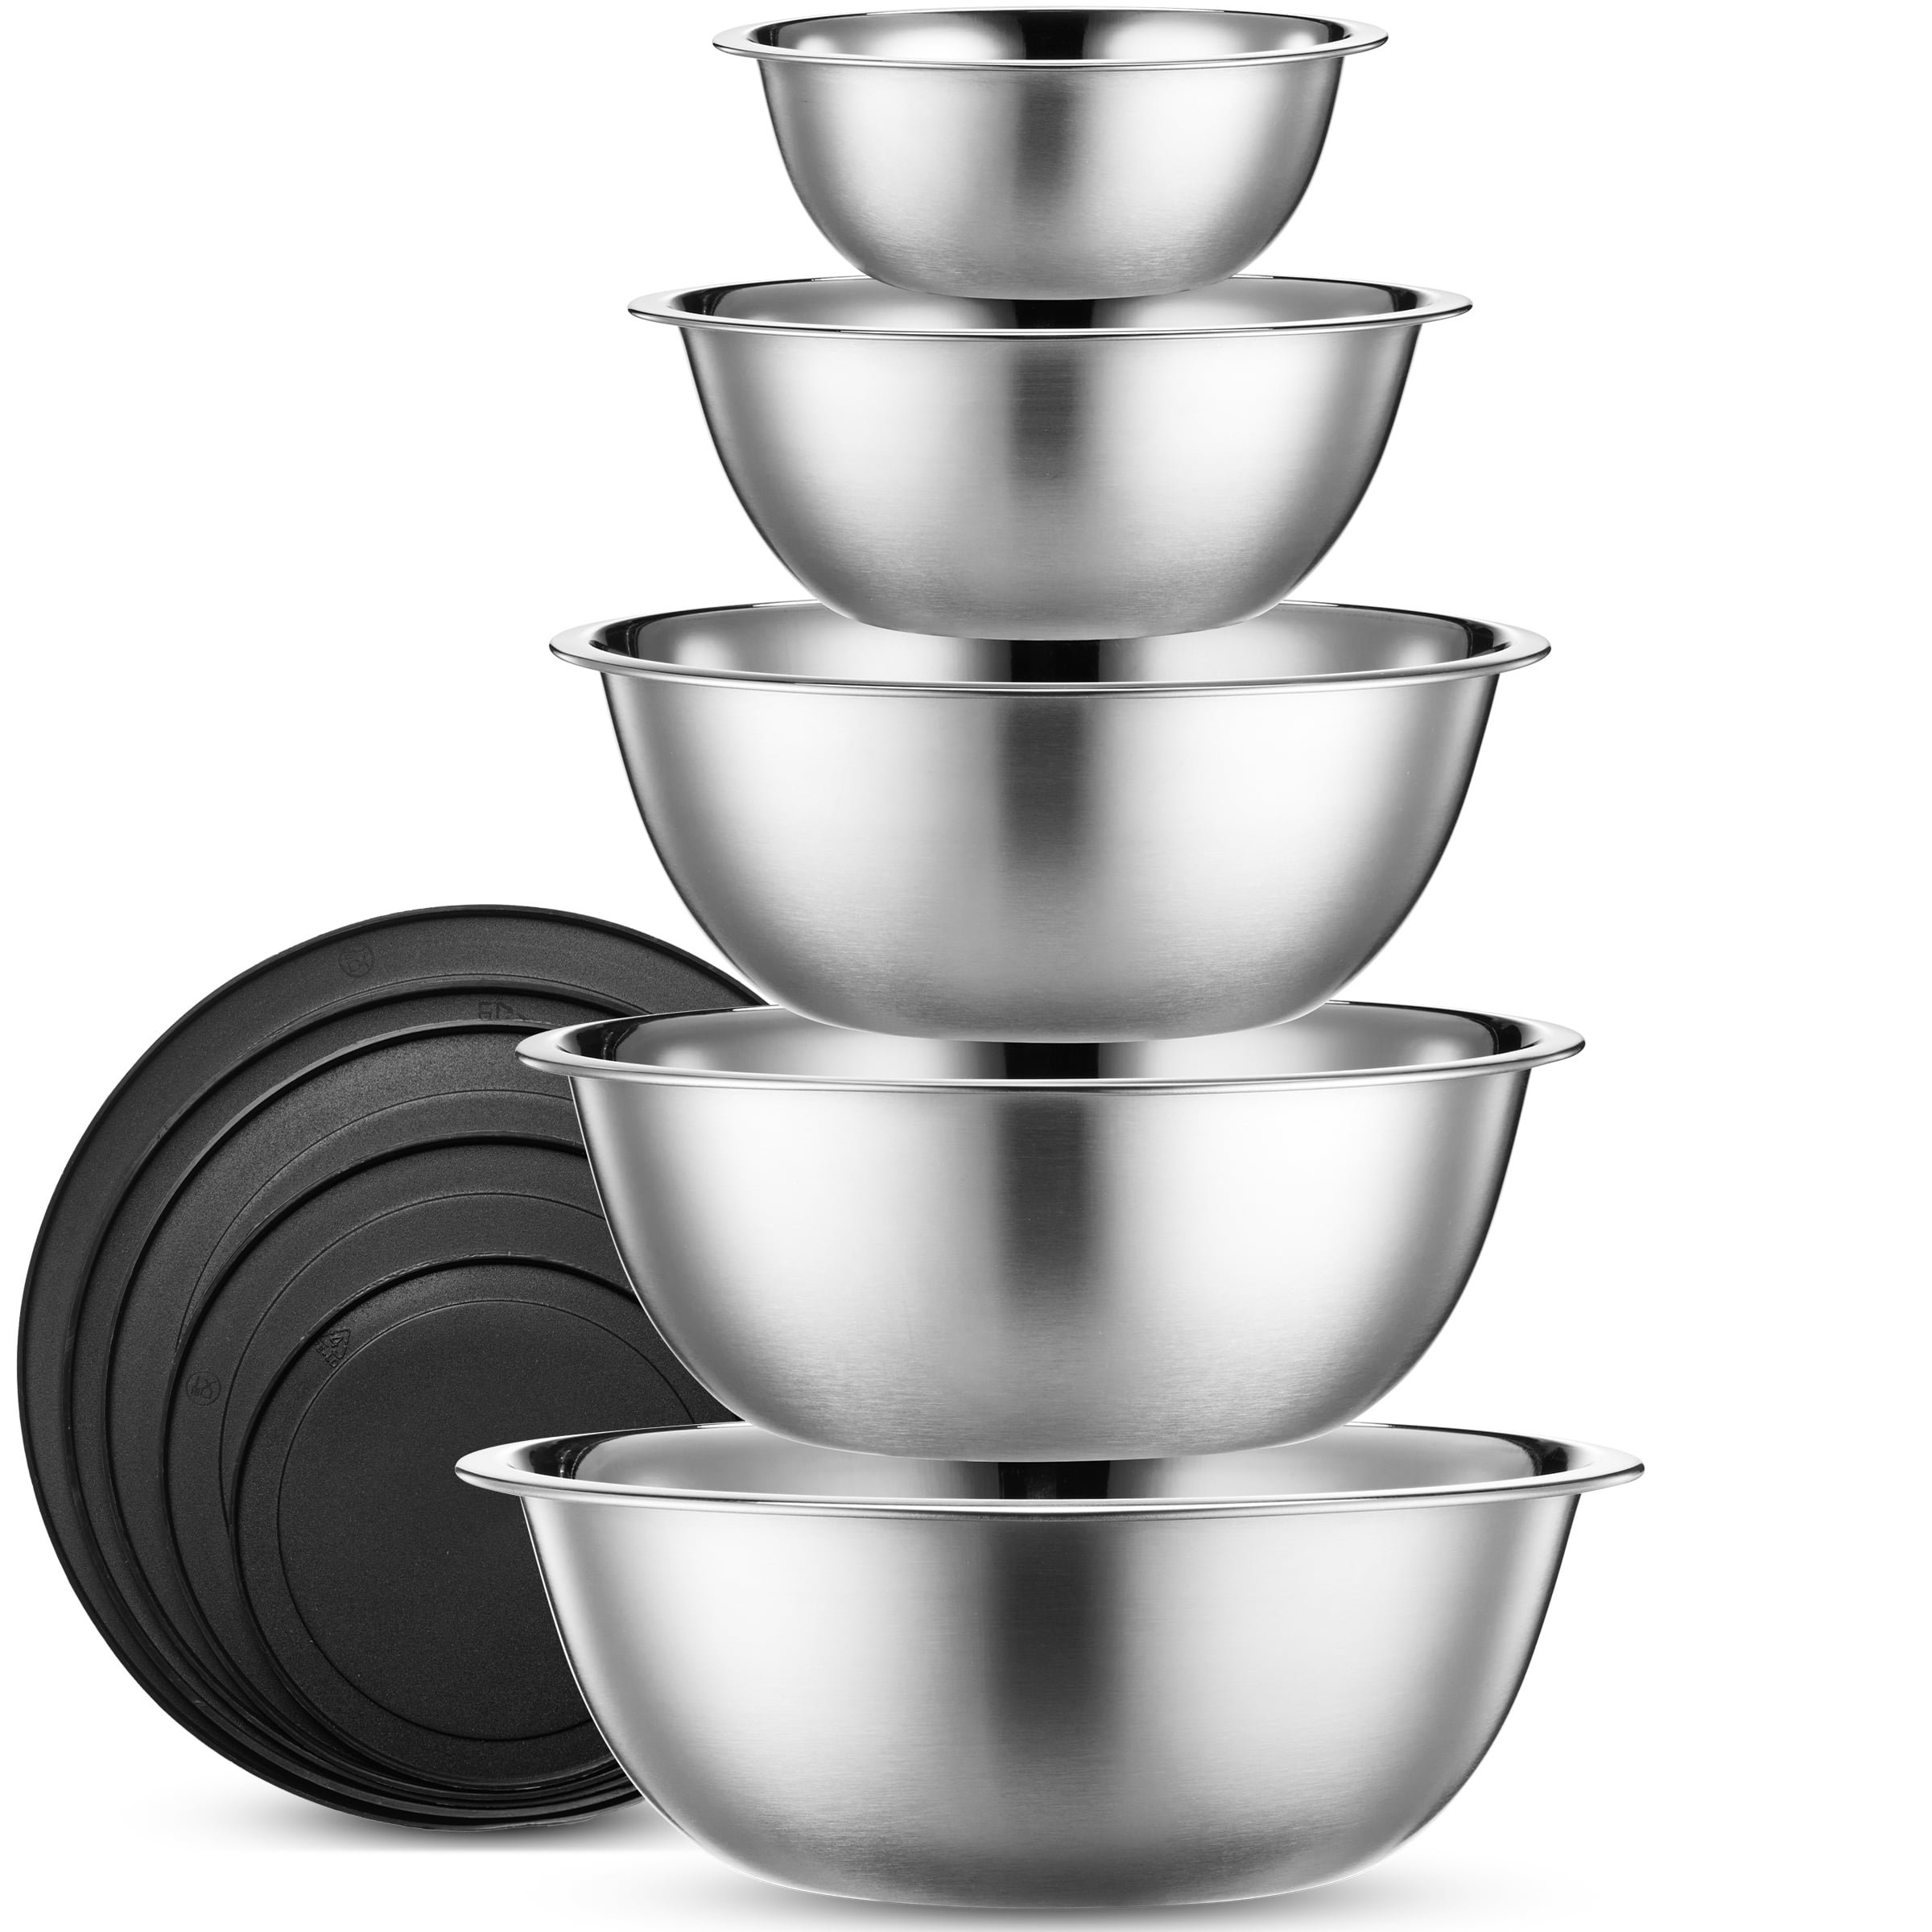 OXO SoftWorks Plastic Mixing Bowl Set - Black/White, 3 pc - Fry's Food  Stores